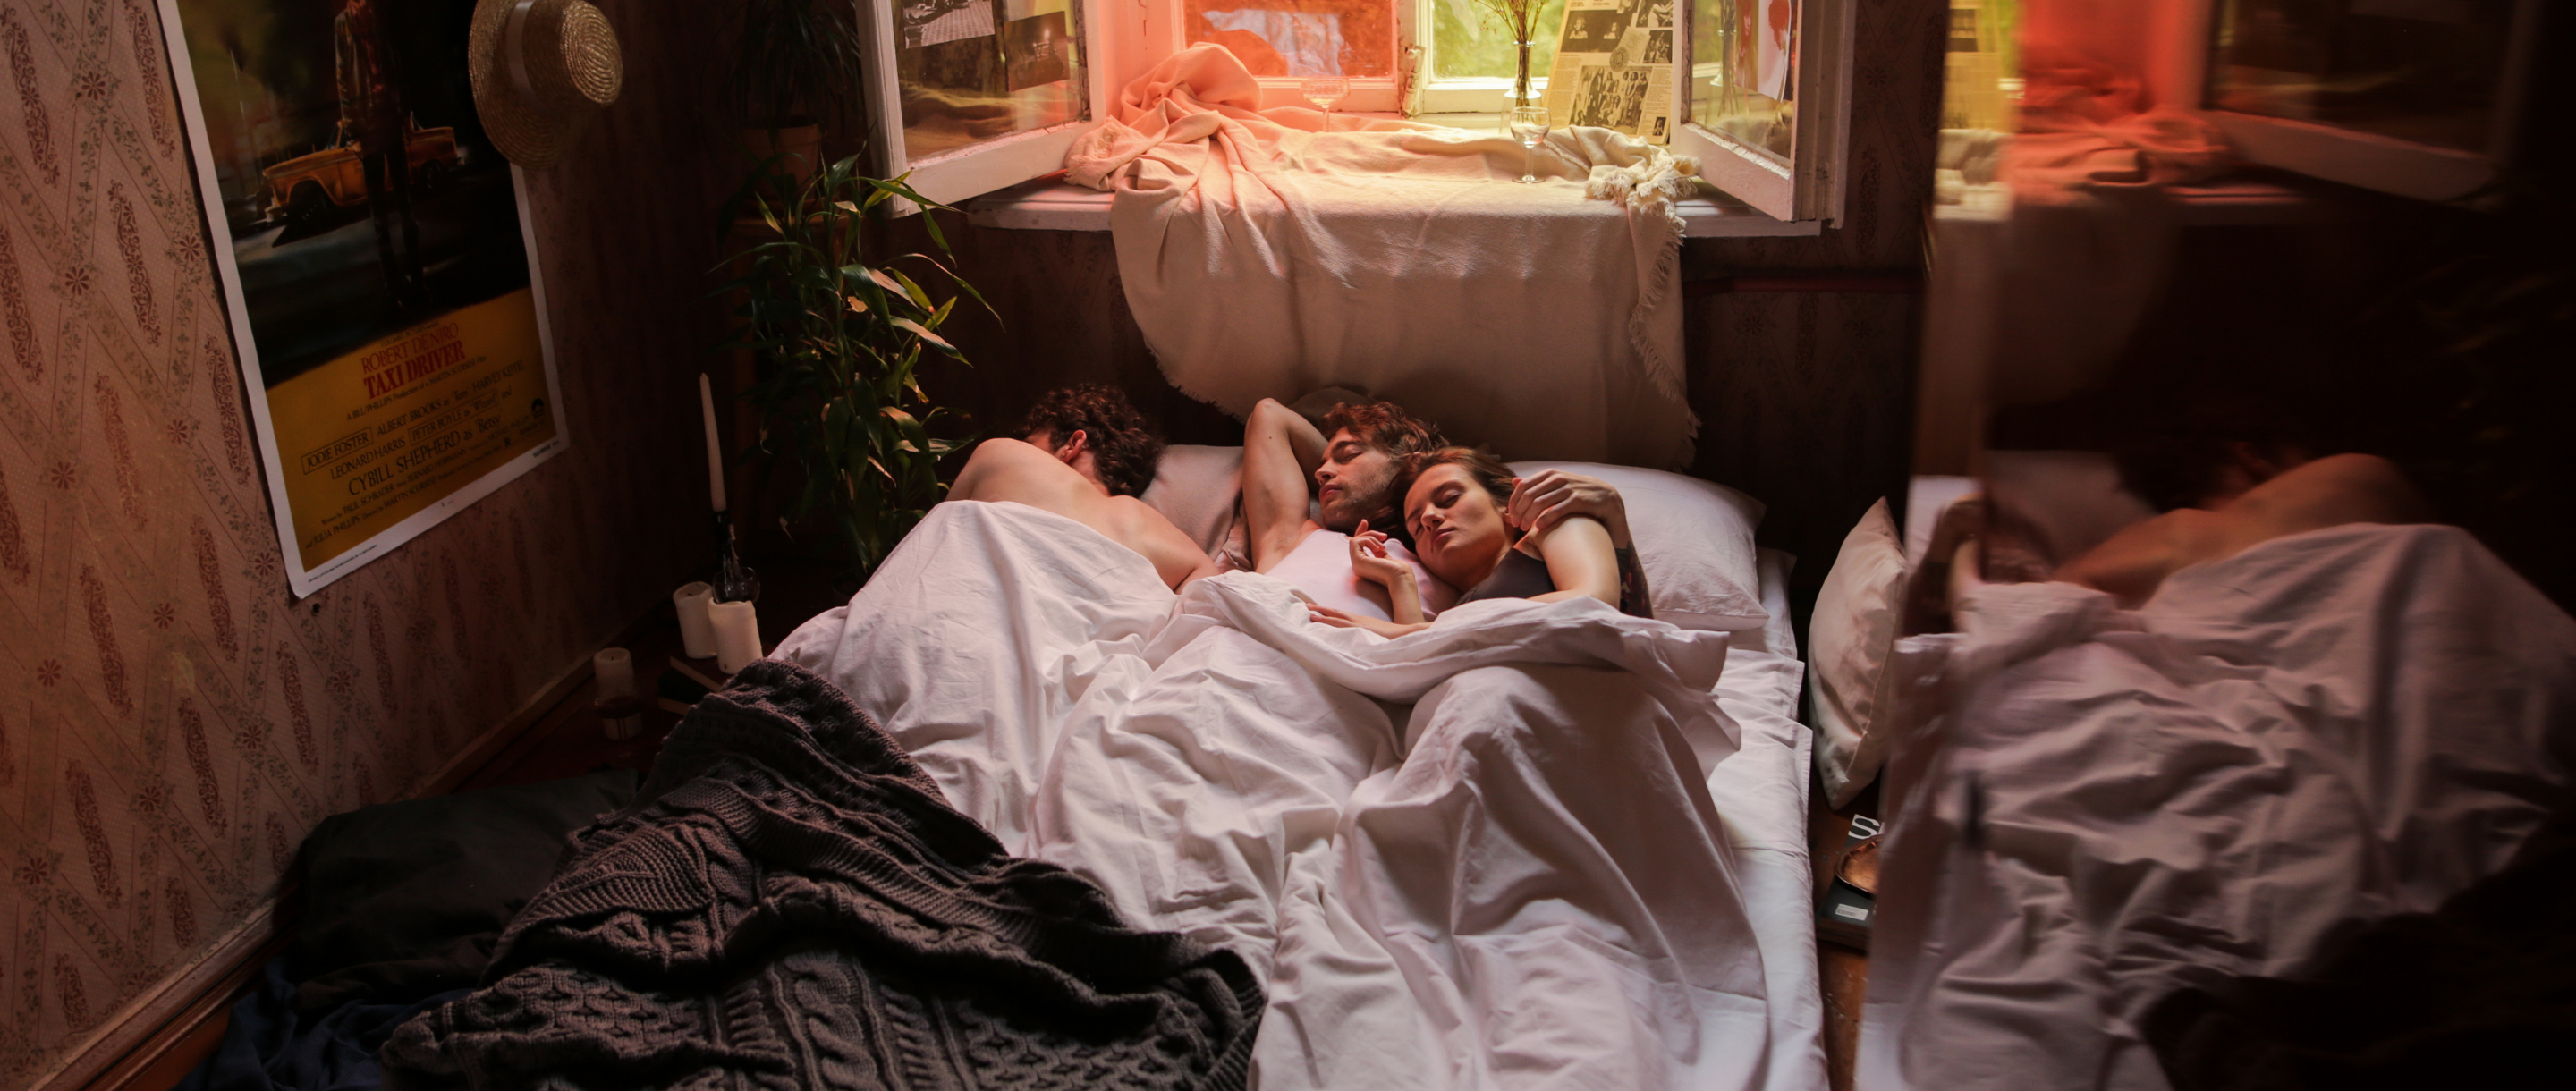 A non-monogamous trio in bed together showing that relationship jealousy is something that everyone can manage